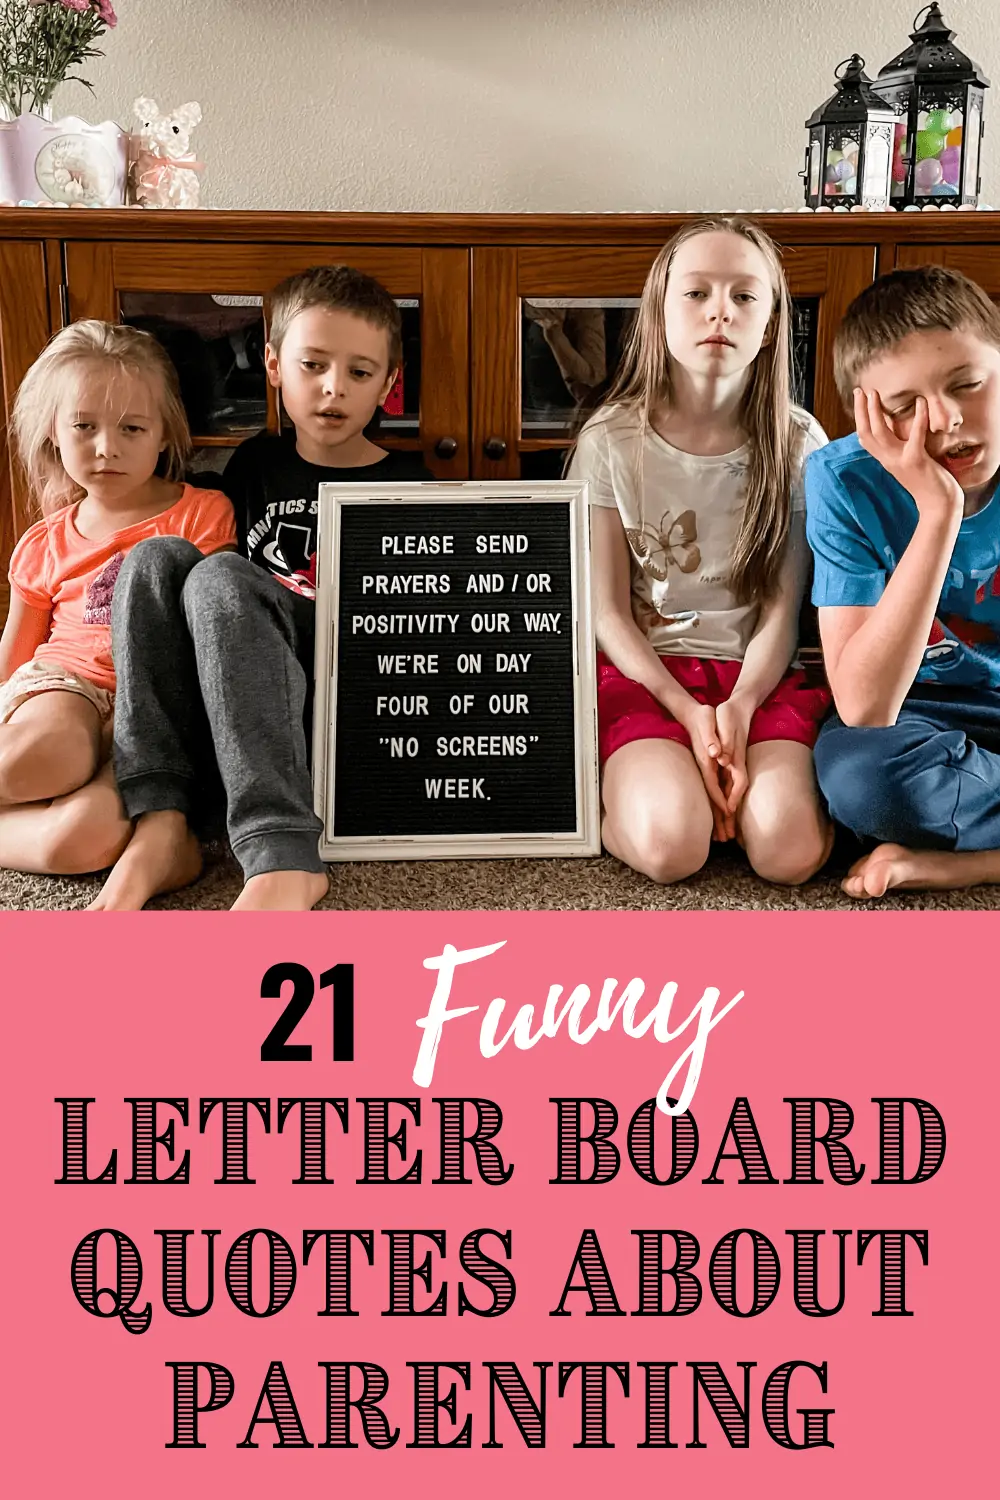 21 Funny Letter Board Quotes Perfect for Your Mom Life